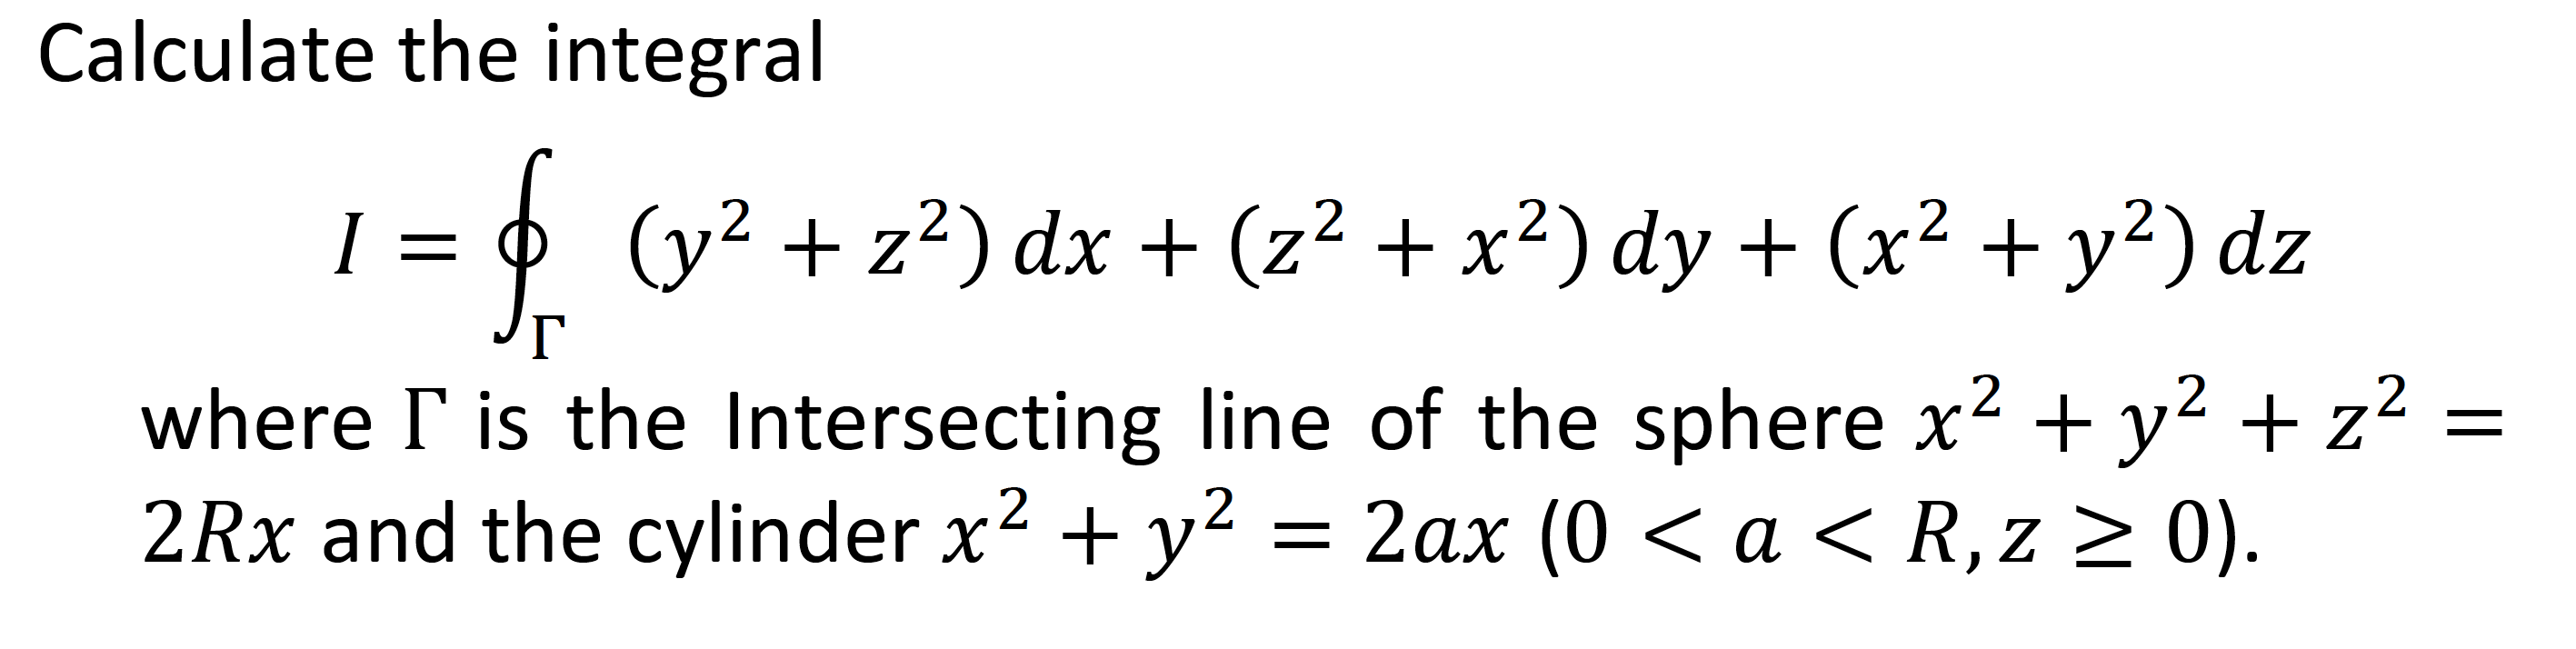 Calculate the integral
I =
= • (y² + z²) dx + (z² + x²) dy + (x² + y²) dz
where I is the Intersecting line of the sphere x2 + y2 + z2 =
2Rx and the cylinder x2 + y² = 2ax (0 < a < R, z > 0).
